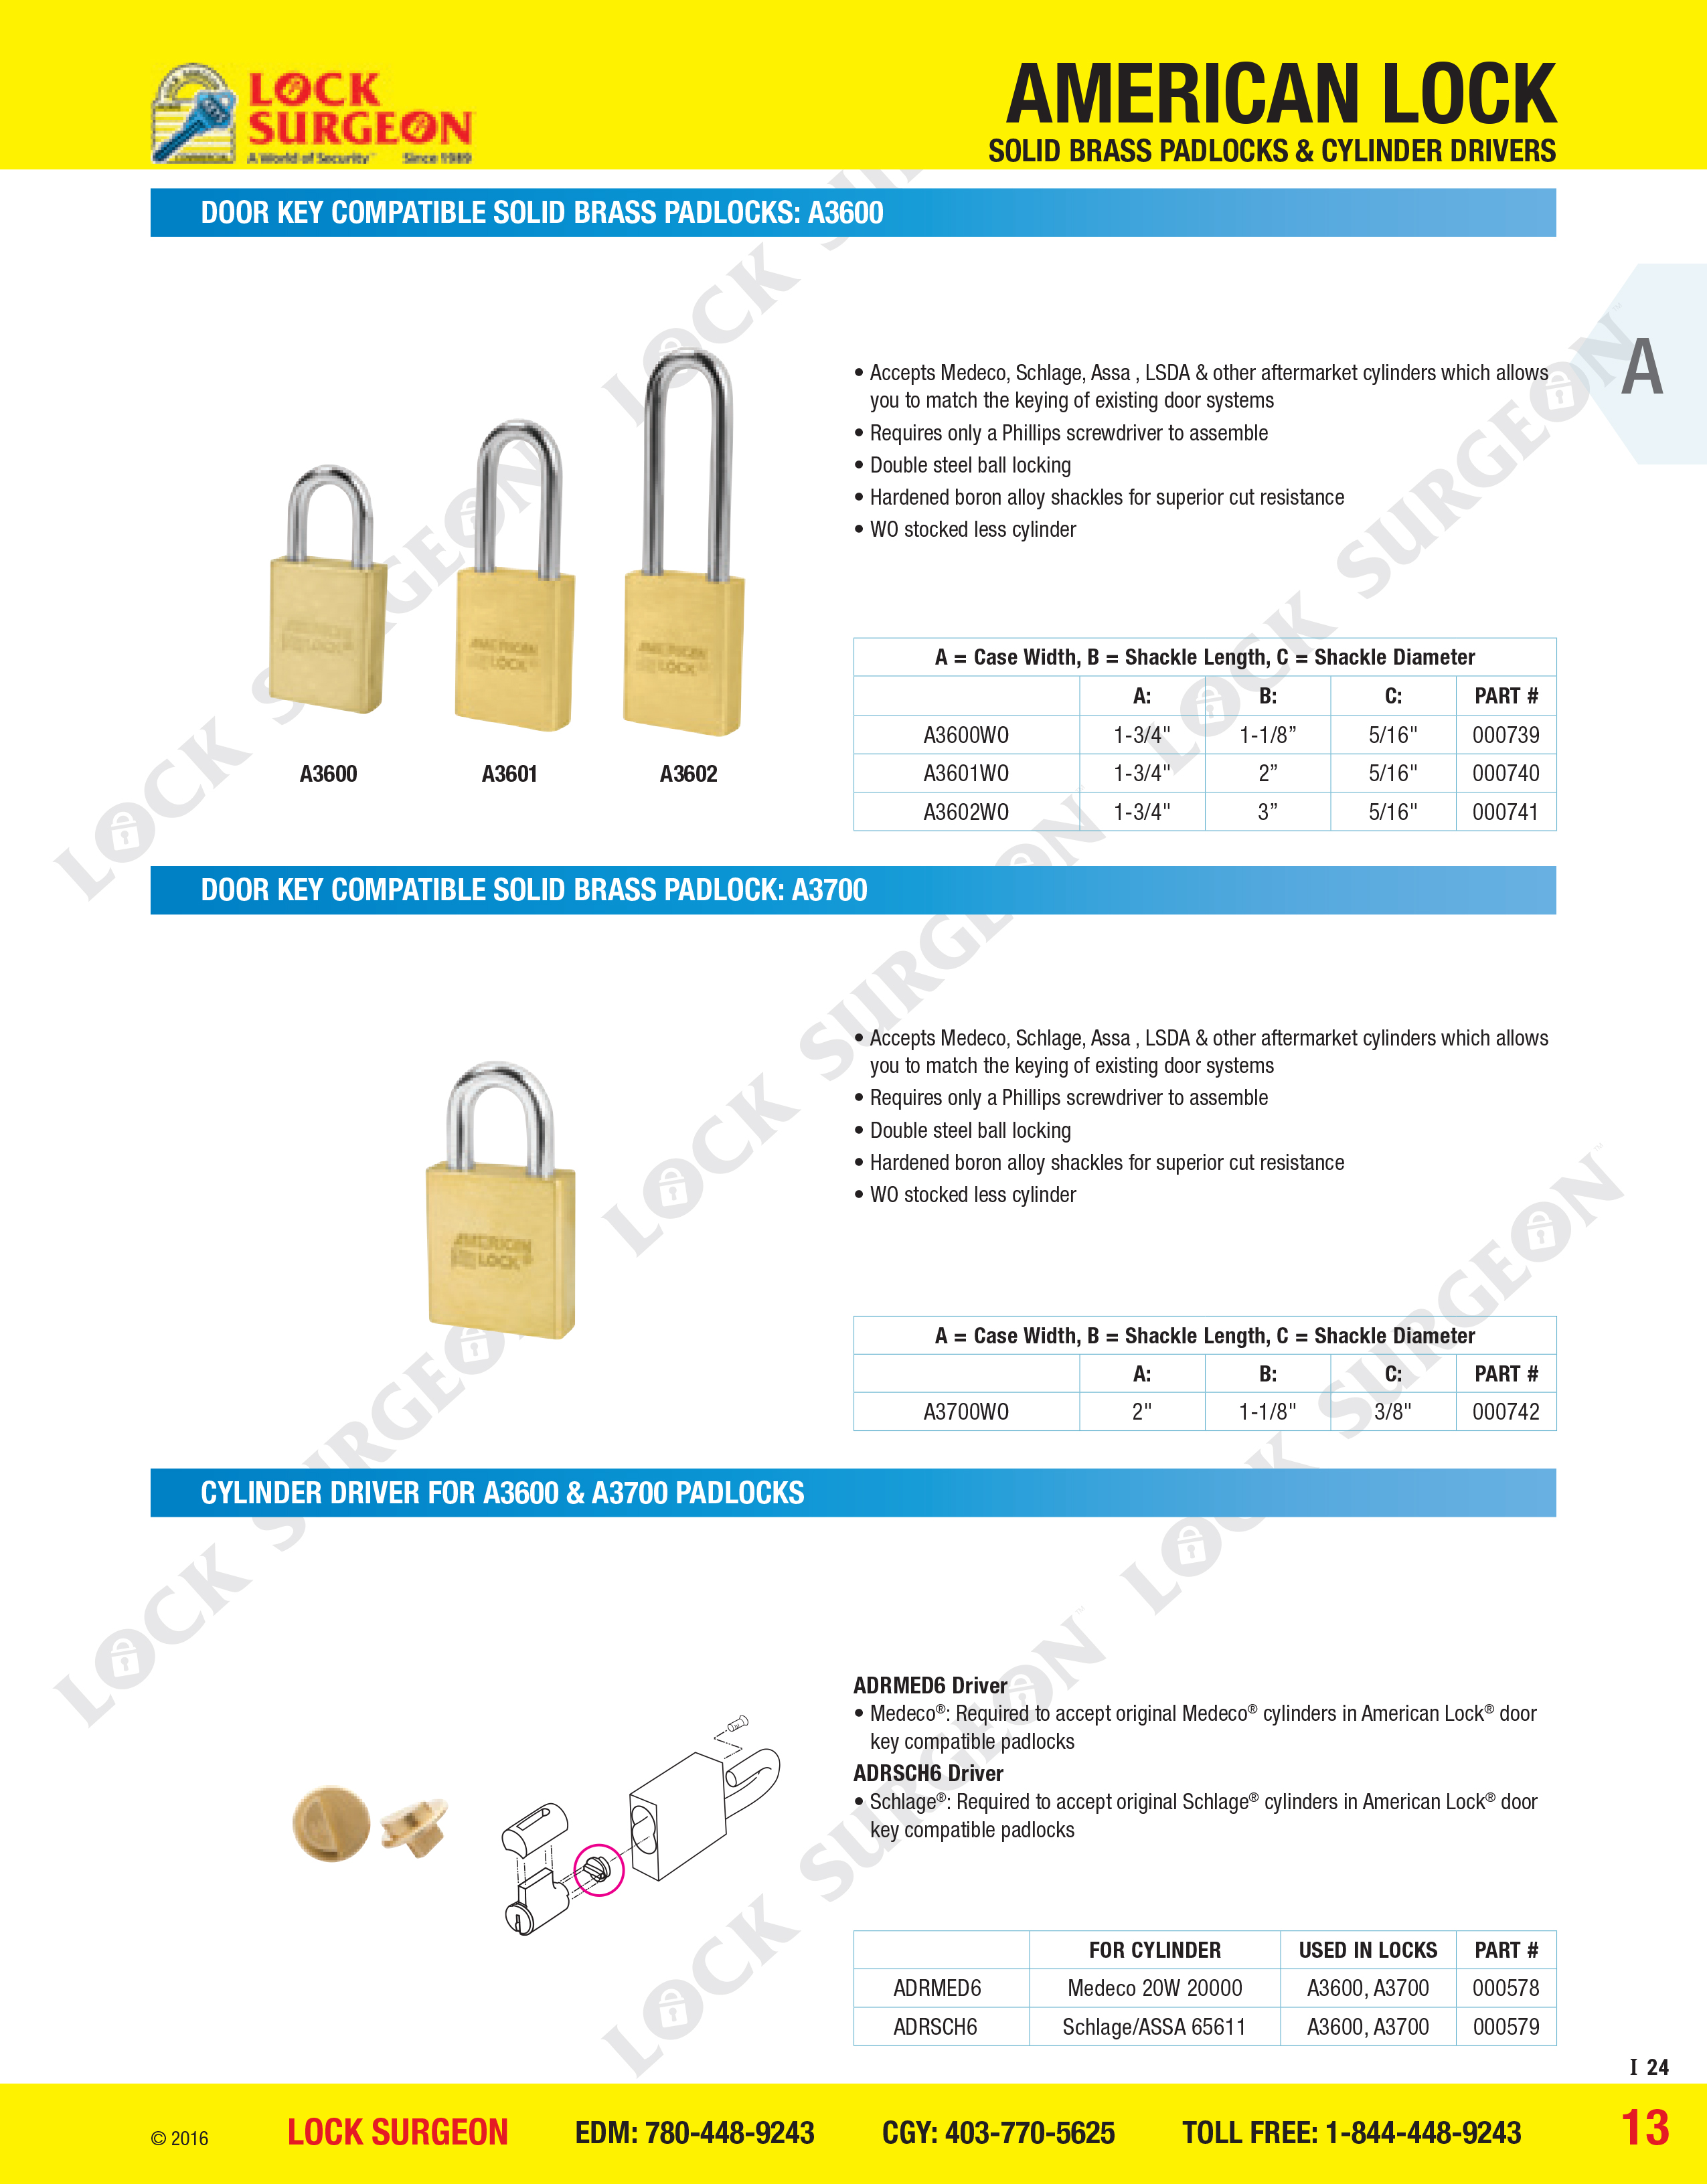 Leduc Door key compatible solid brass padlocks: A3600, A3700 Cylider drivers for A3600, A3700 Padlocks